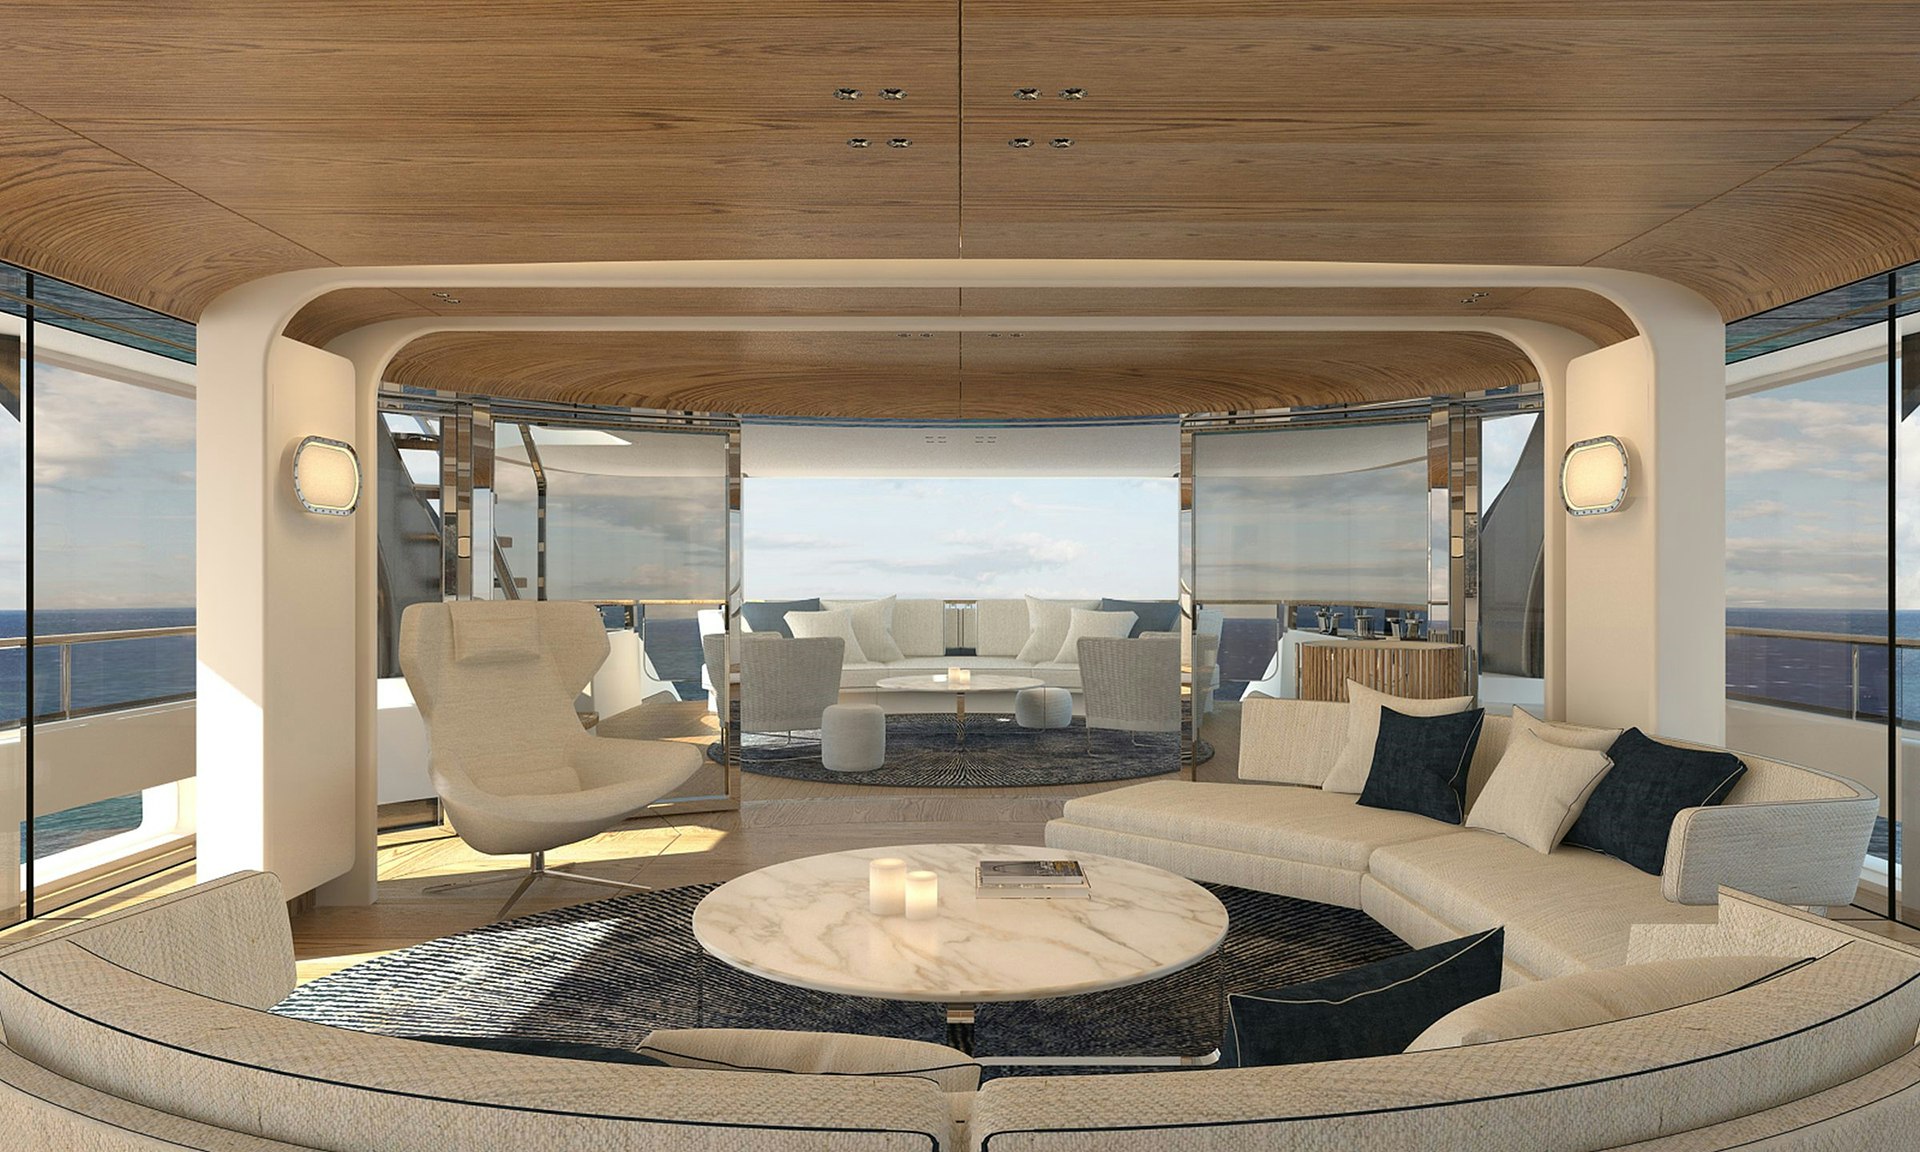 Lounge area of yacht.